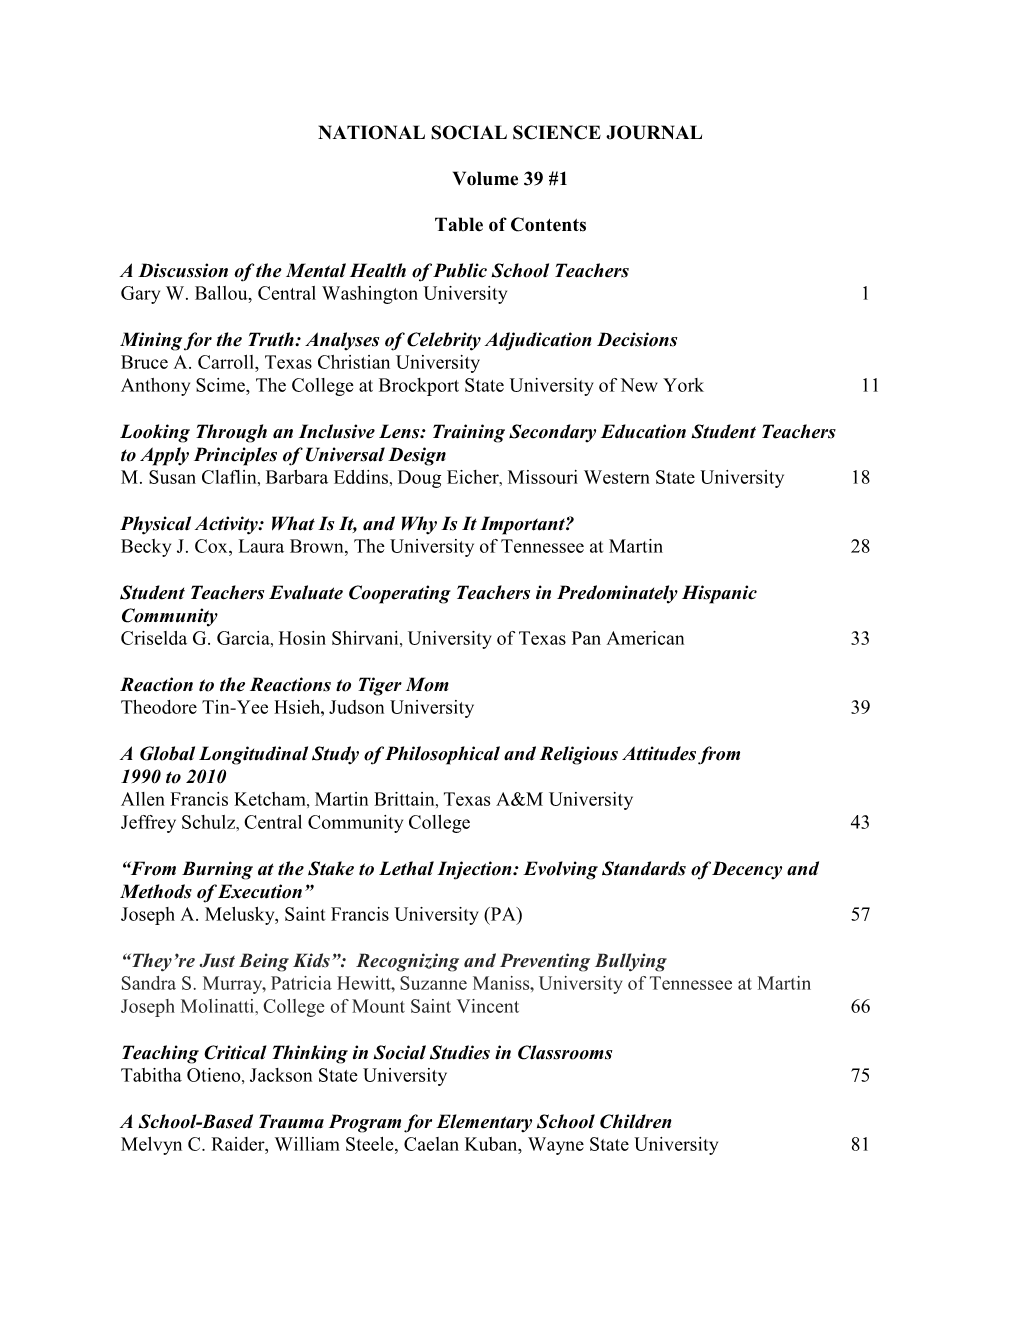 NATIONAL SOCIAL SCIENCE JOURNAL Volume 39 #1 Table Of